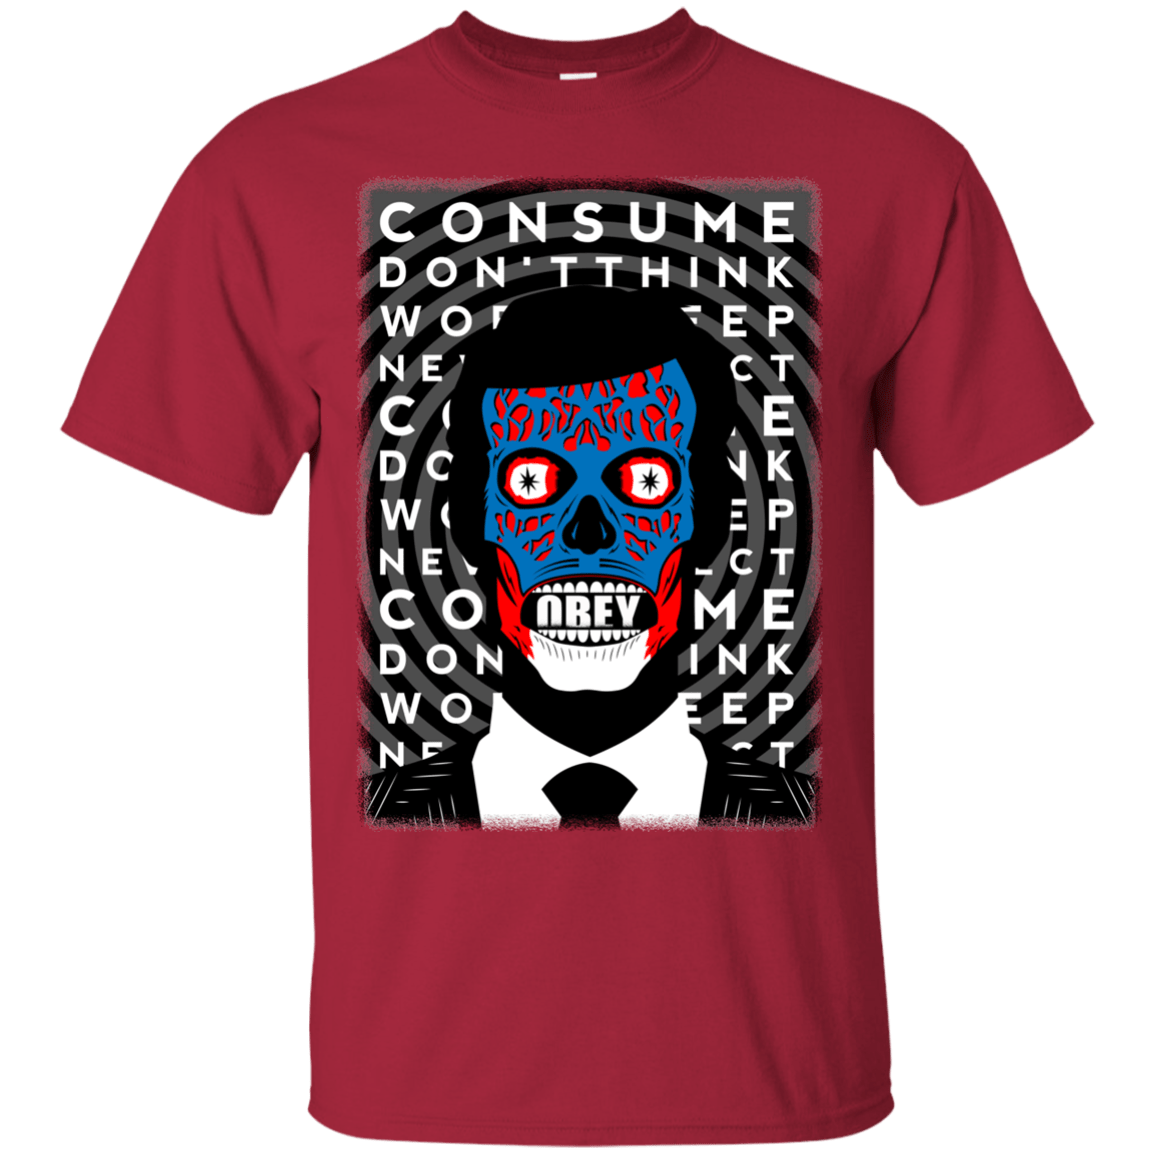 Obey One Ring Boys Premium T-Shirt – Pop Up Tee